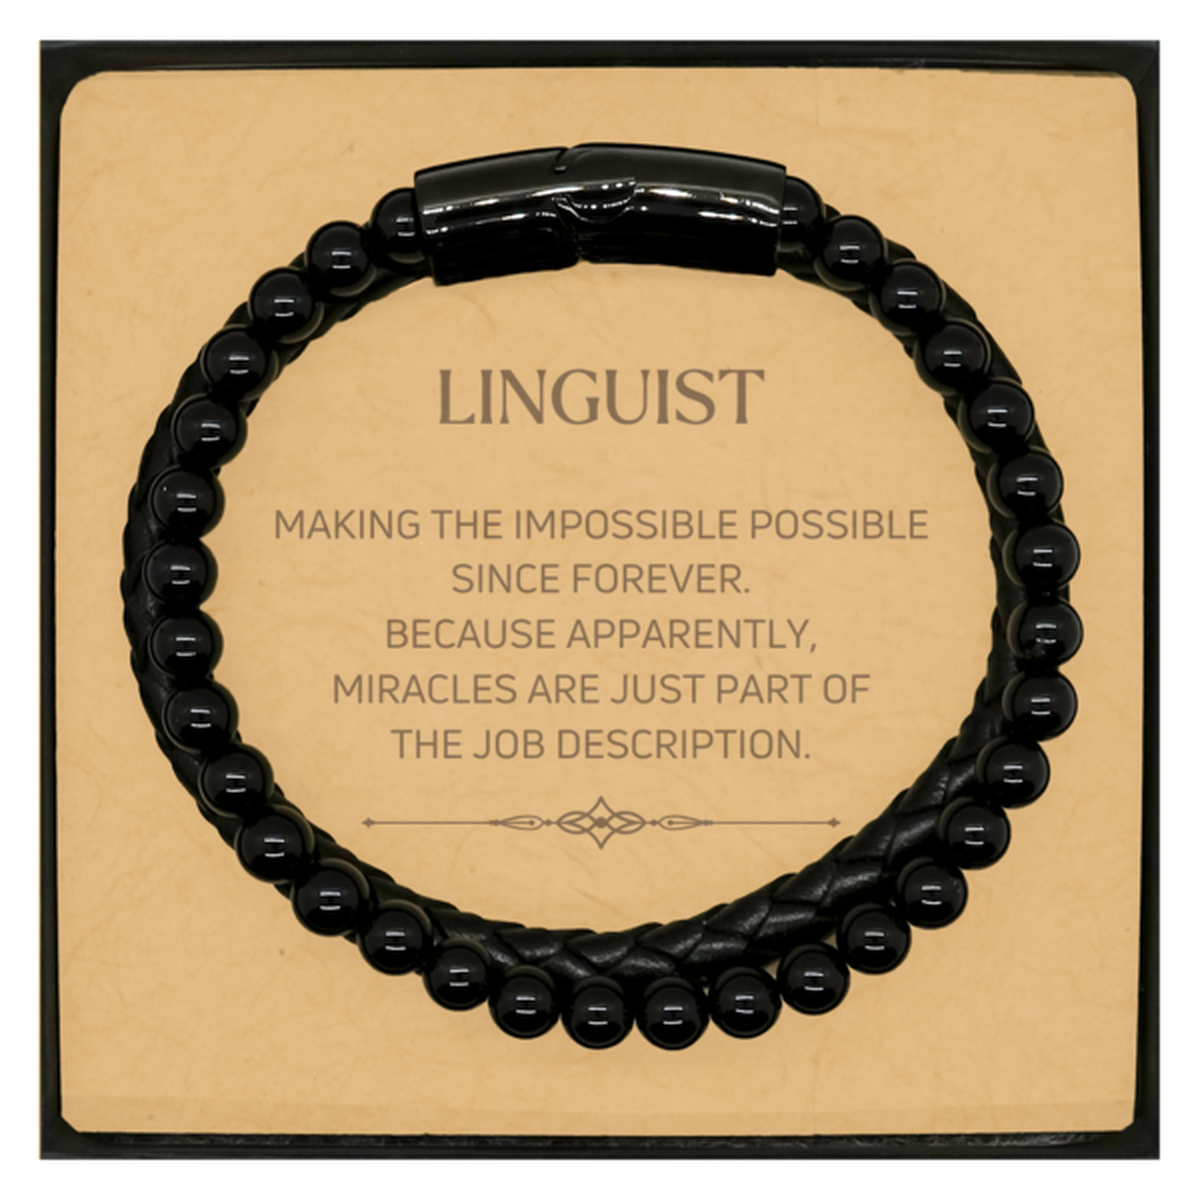 Funny Linguist Gifts, Miracles are just part of the job description, Inspirational Birthday Christmas Stone Leather Bracelets For Linguist, Men, Women, Coworkers, Friends, Boss